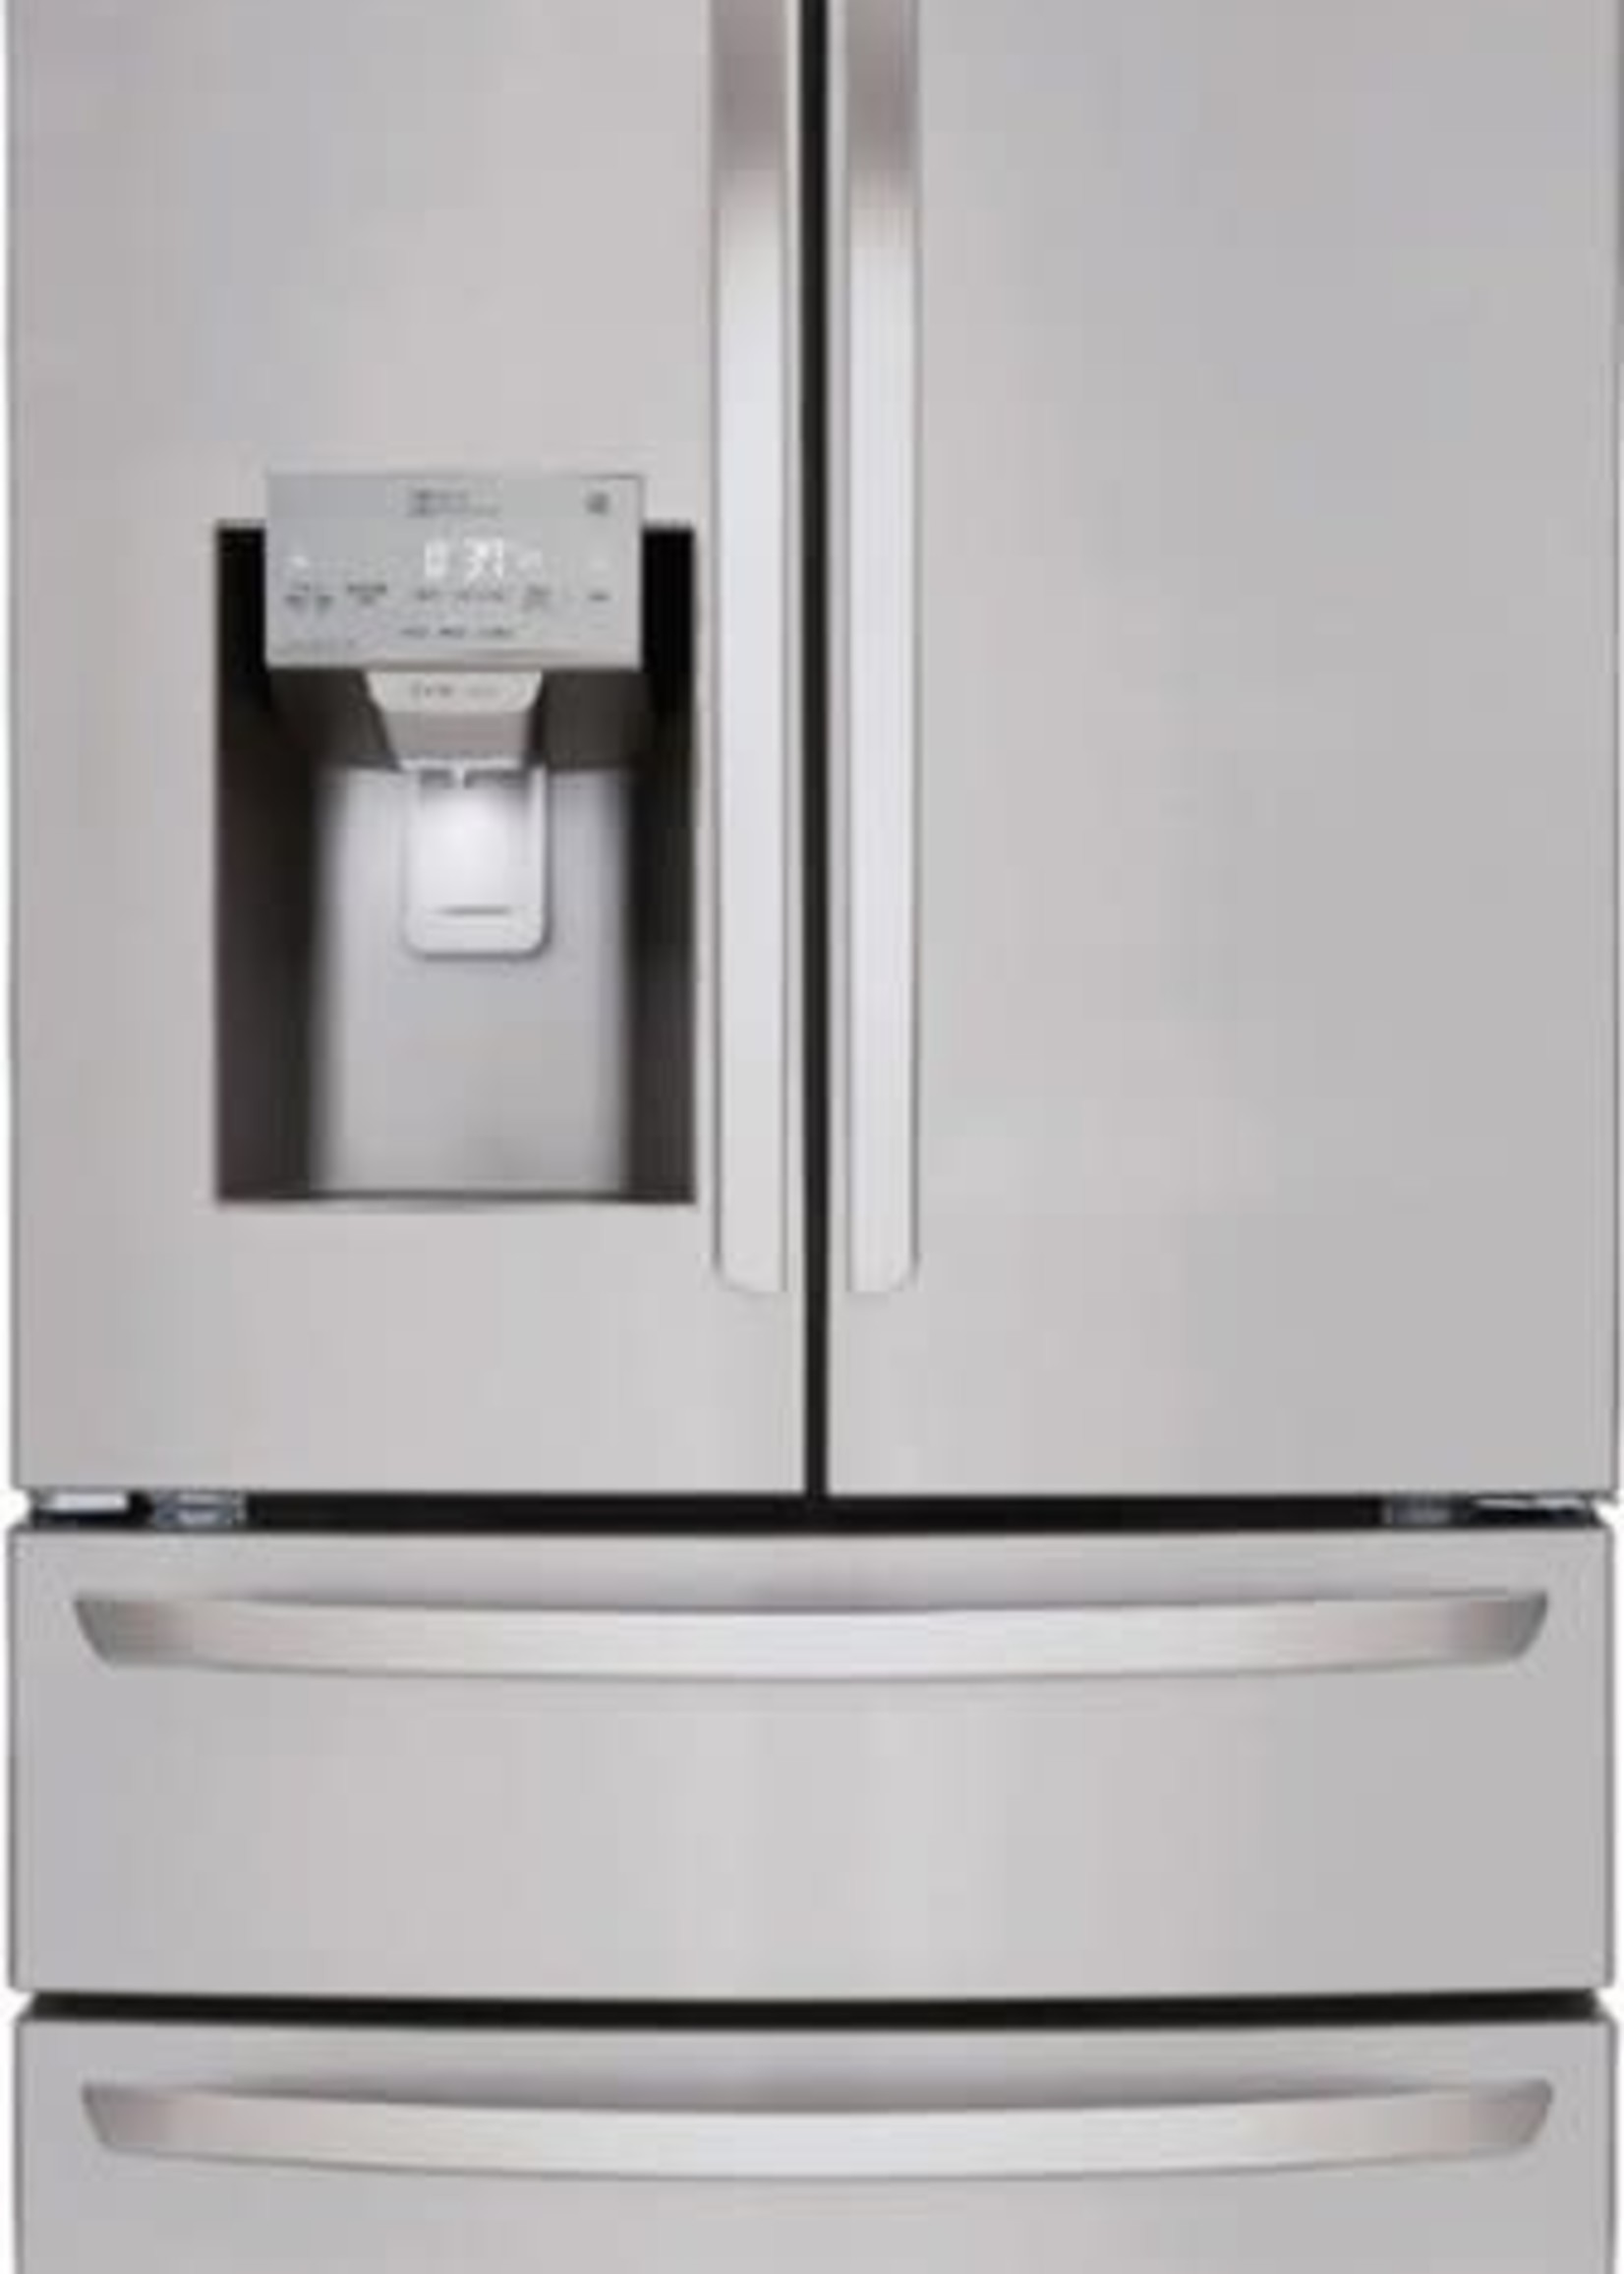 LG *LG  LMXS28626S  27.8 cu. ft. 4 Door French Door Smart Refrigerator with 2 Freezer Drawers and Wi-Fi Enabled in Stainless Steel